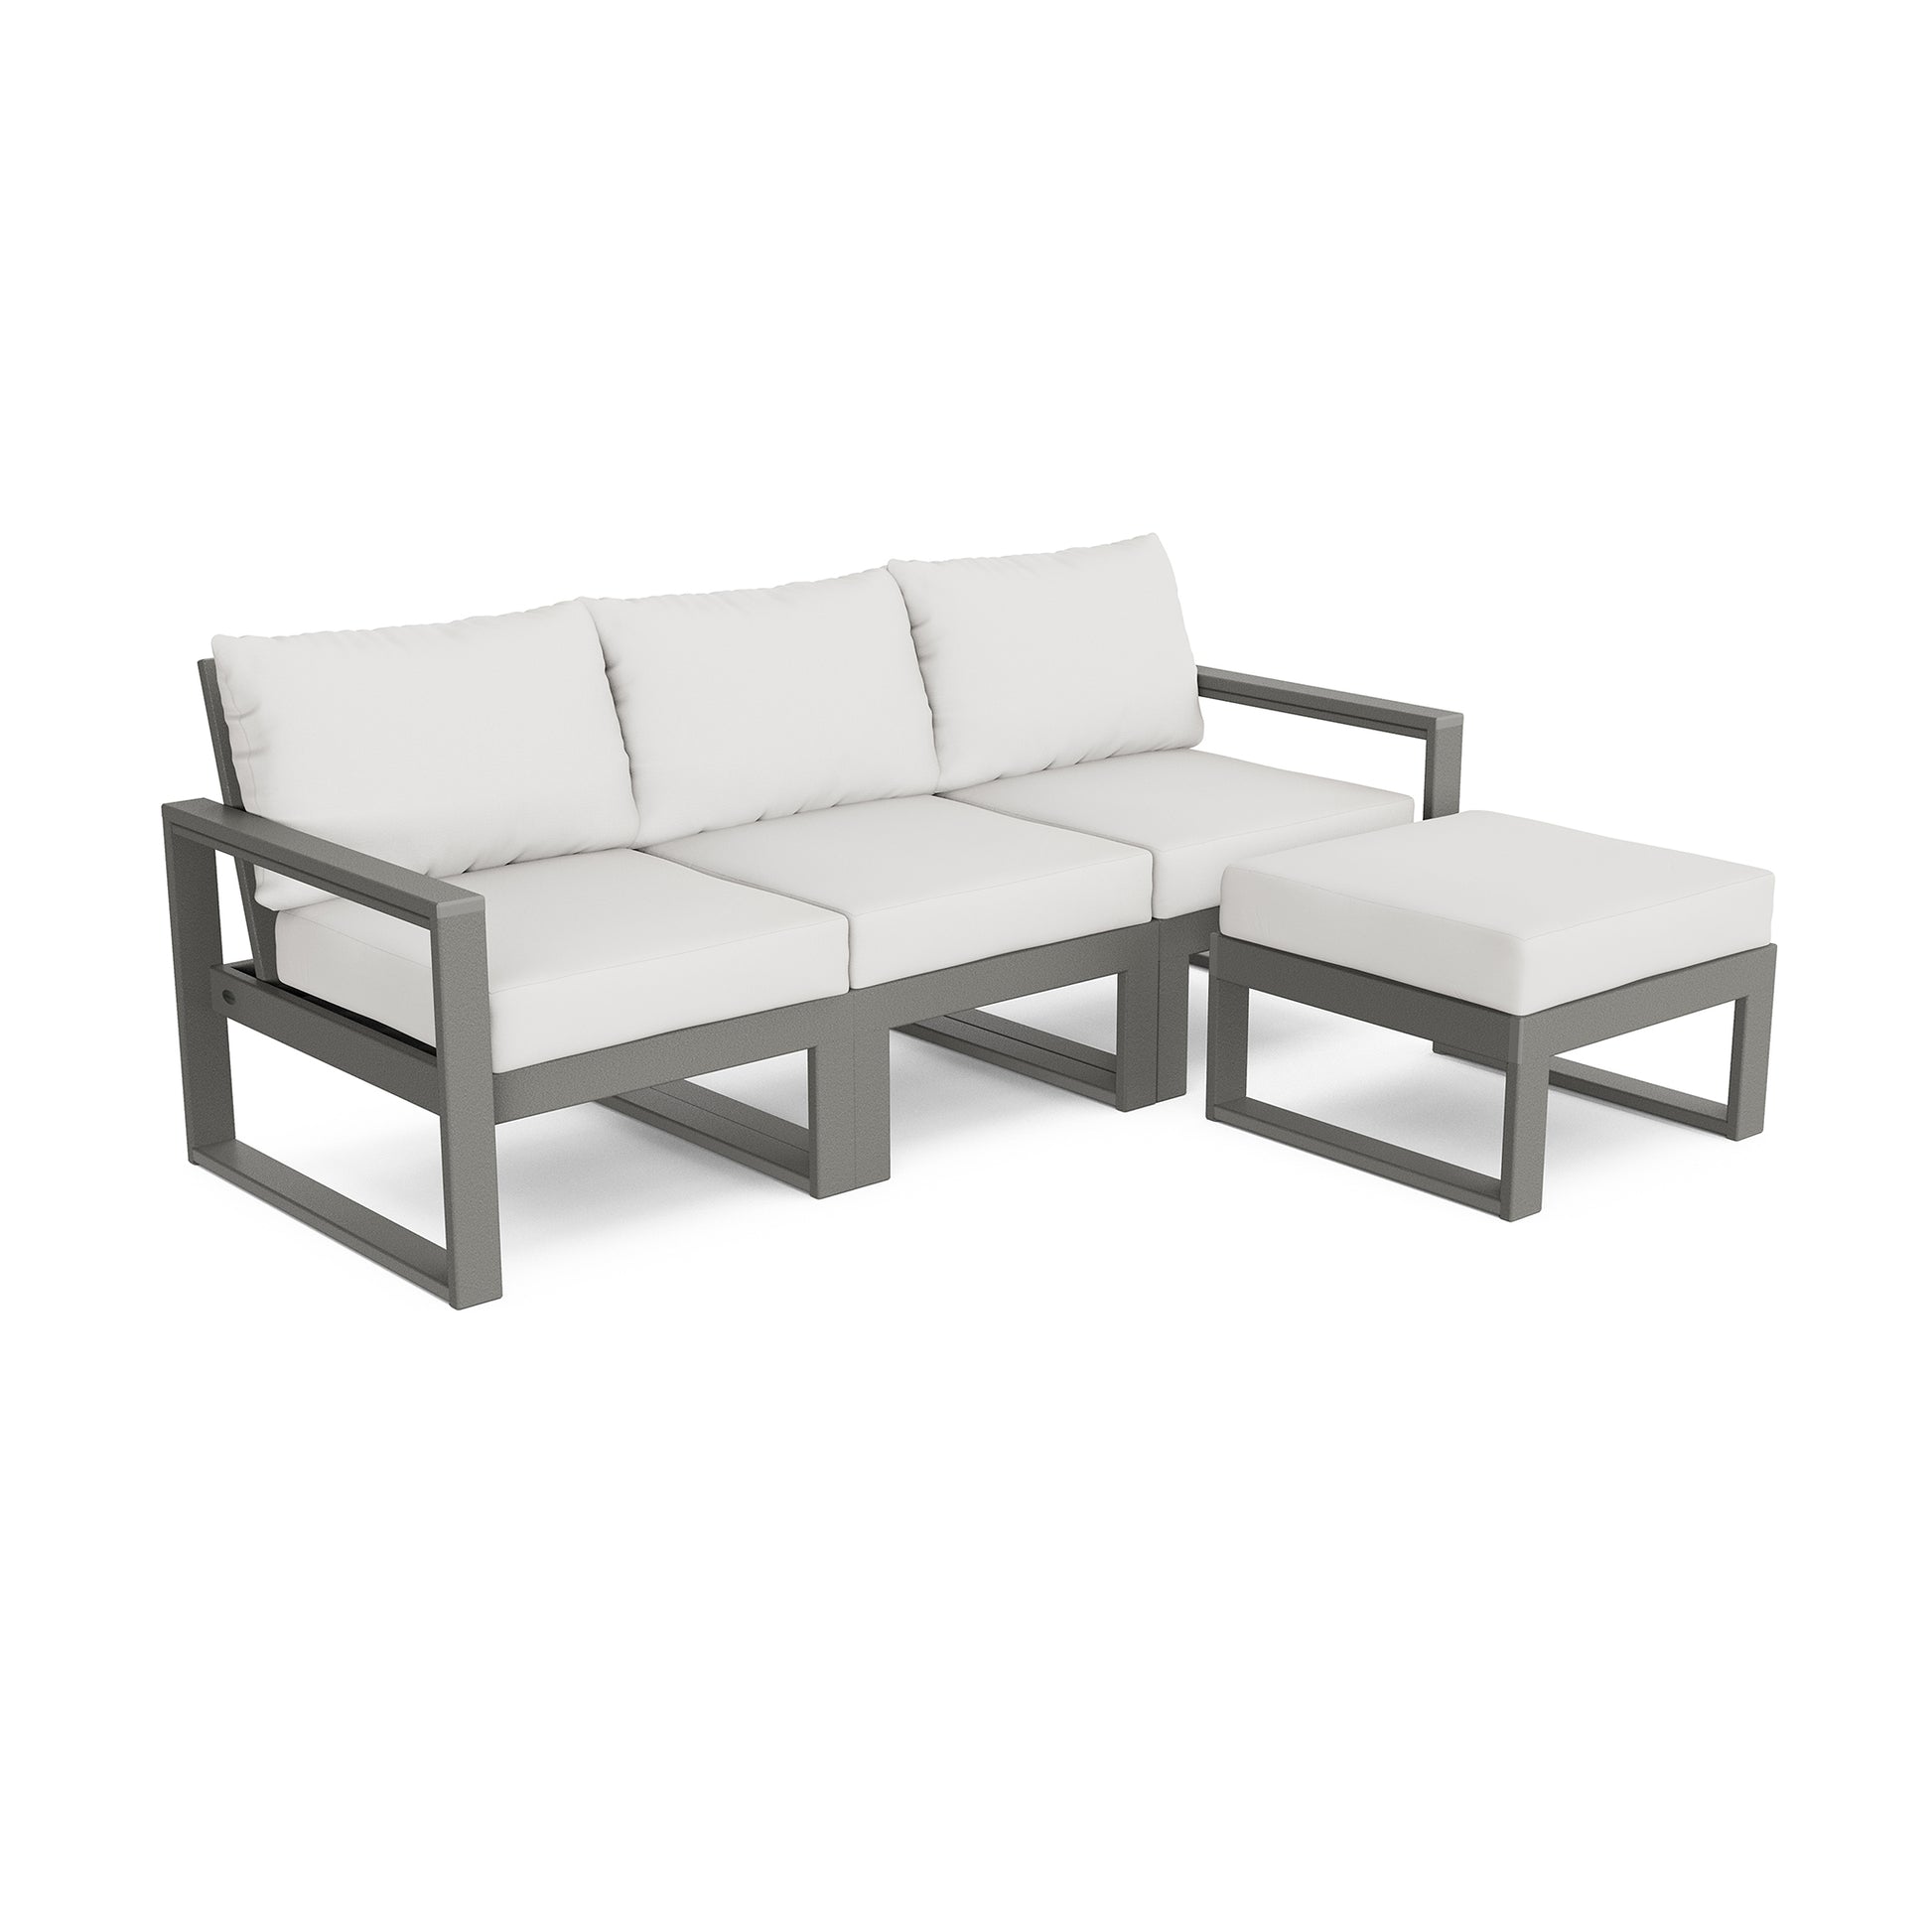 A modern POLYWOOD EDGE modular outdoor seating set featuring a gray aluminum frame with white cushions. The set includes a three-seat sofa and a matching ottoman, isolated on a white background.